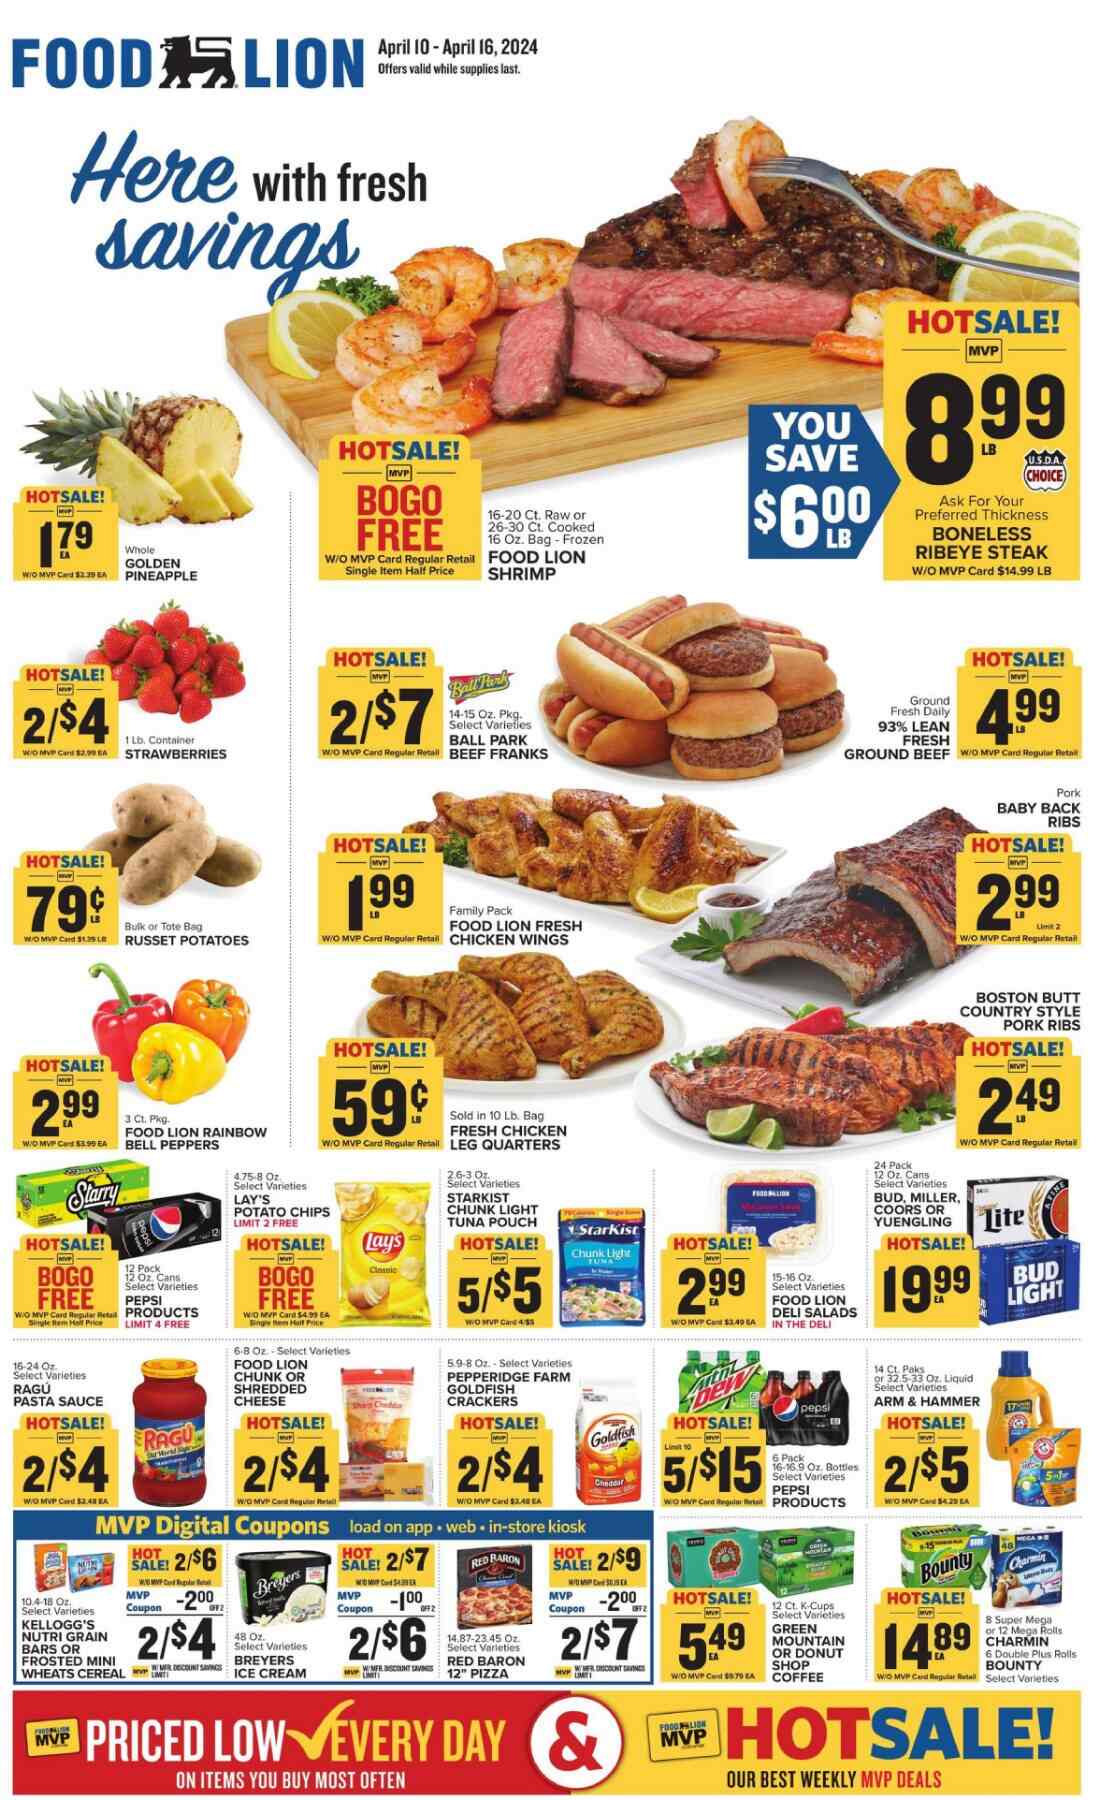 Food Lion Weekly Ad April 10 to April 16 2024 1 – food lion ad 1 4